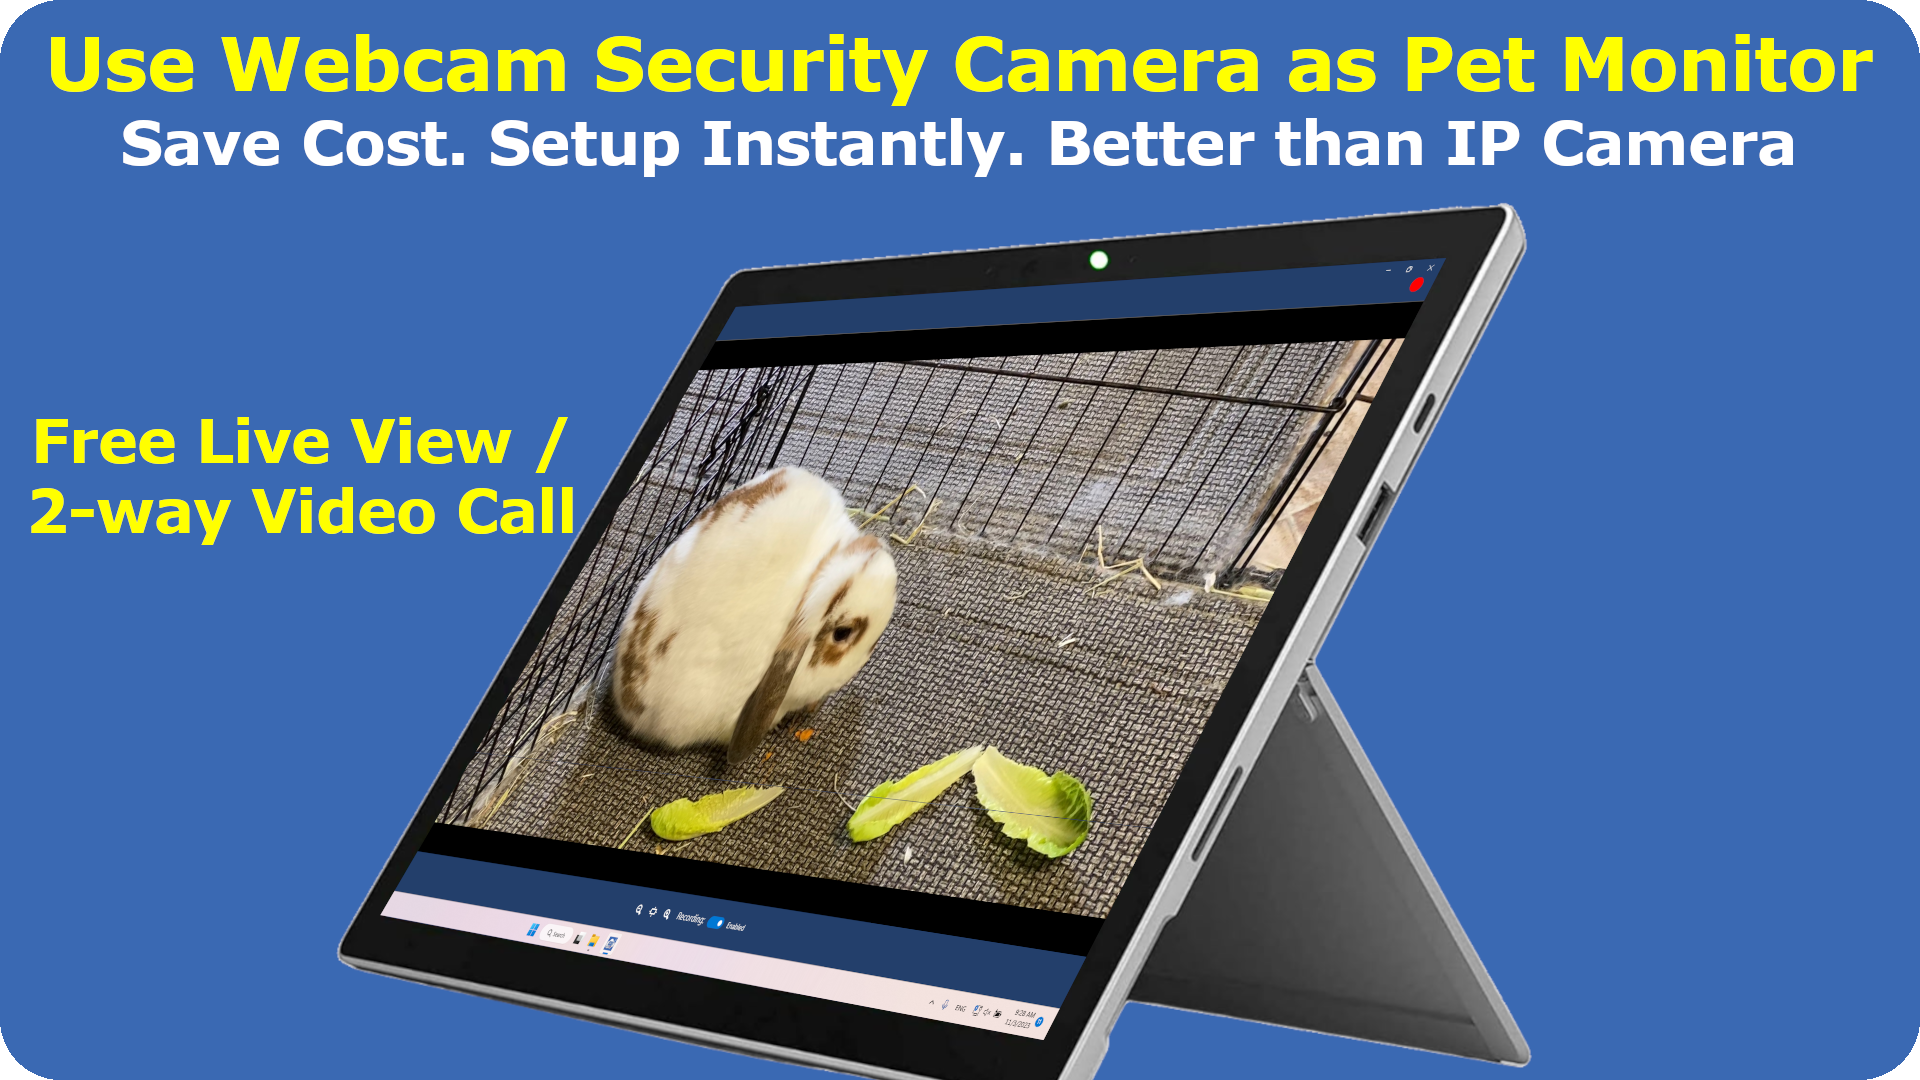 Use Webcam Security Camera as Pet monitor. Save cost, Setup instantly, better than IP camera. Free live view and 2-way video call.